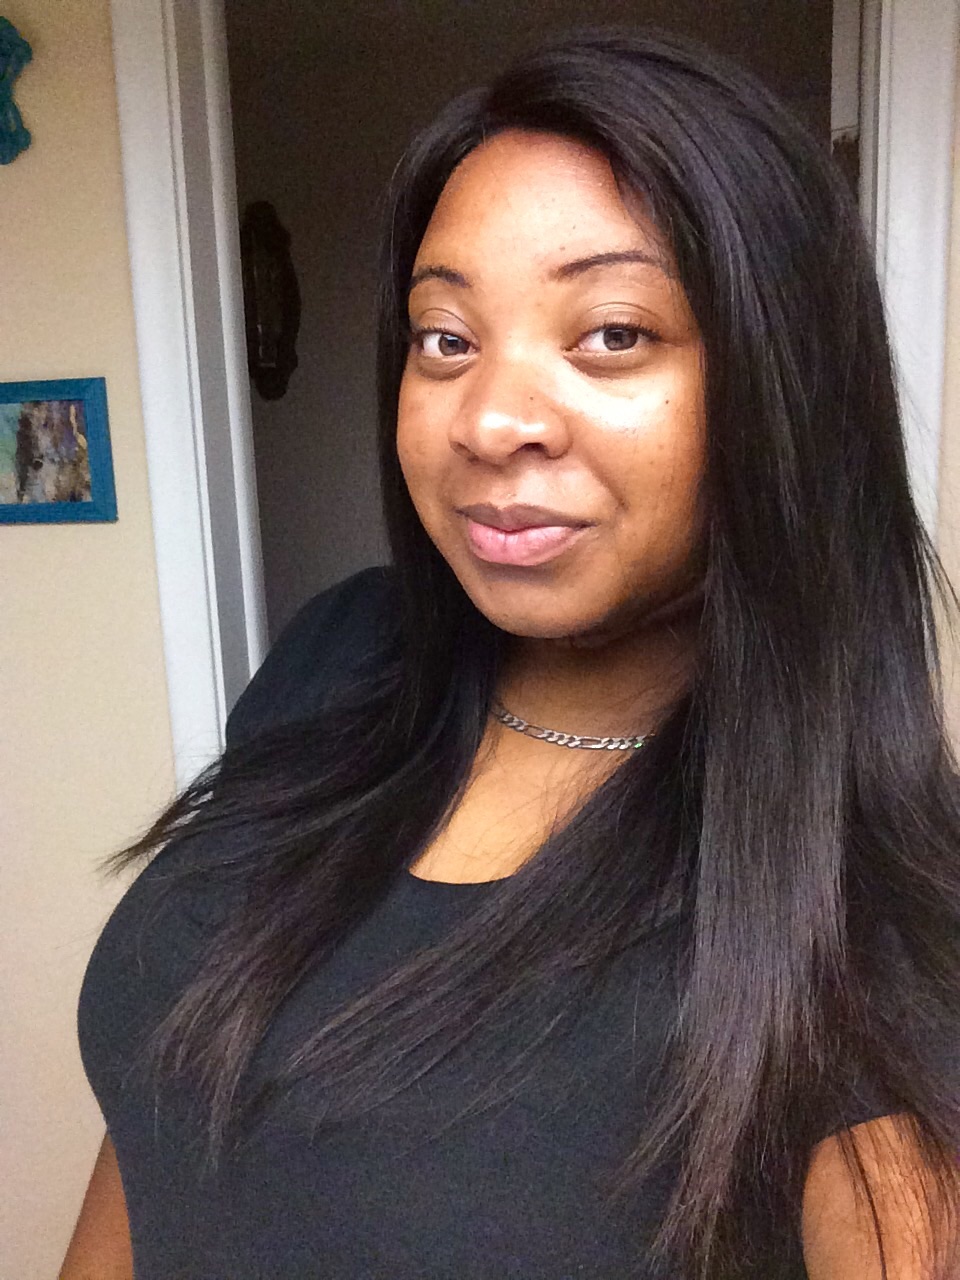 Best lace wig on 08/04/15